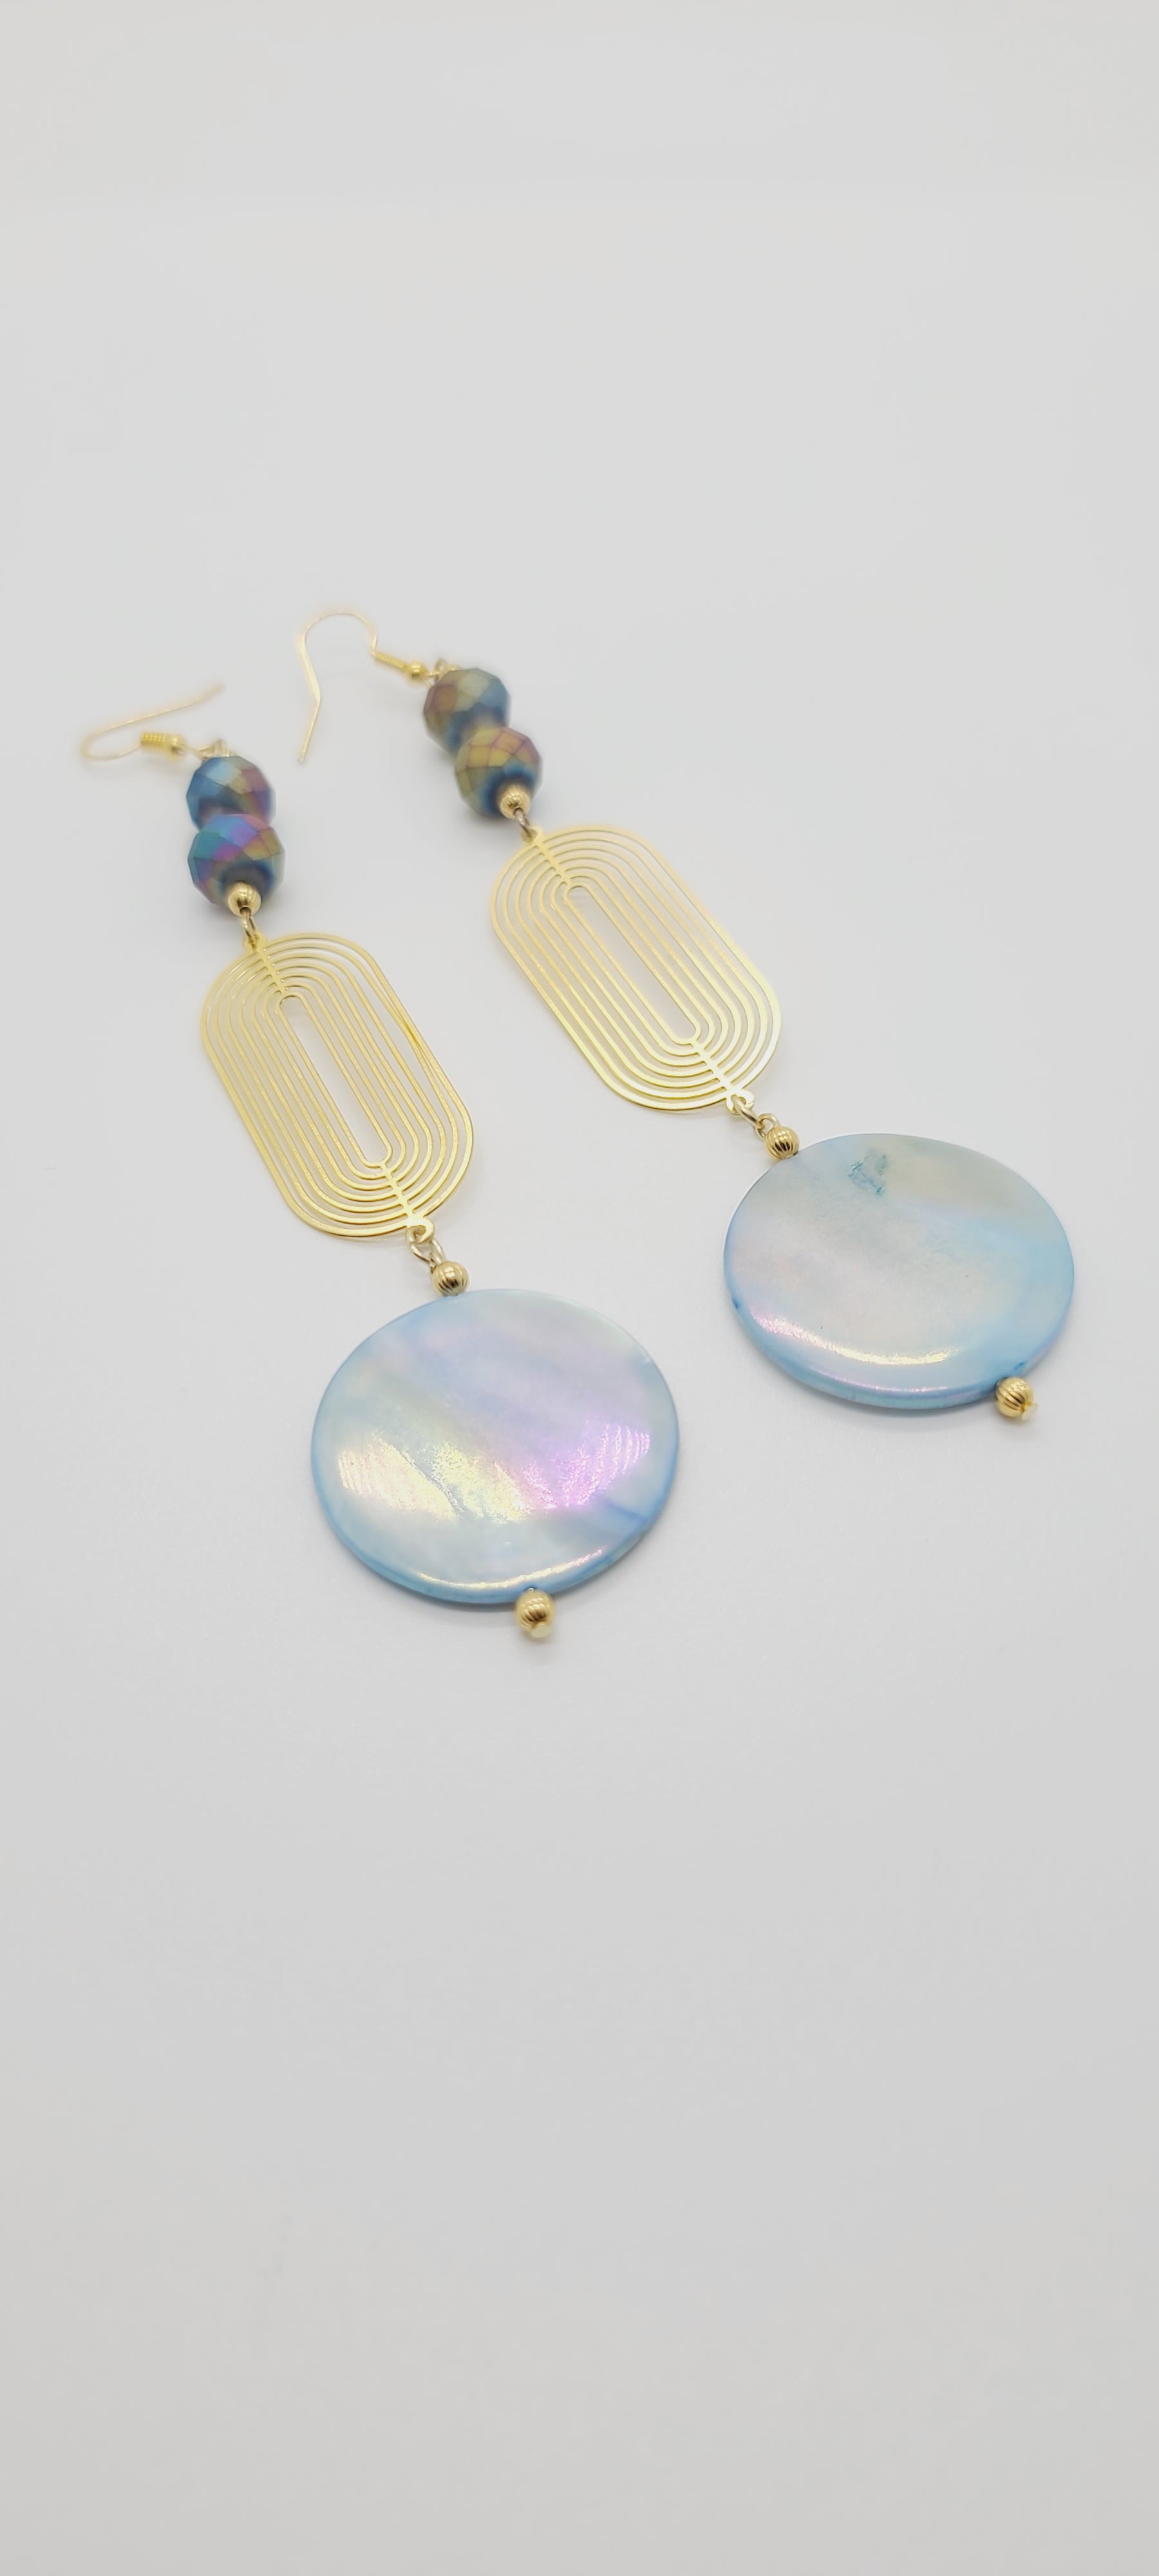 Length: 5 inches | Weight: 0.6 ounces  Distinctly You! These earrings are made with blue Abalone Shell discs, 10mm iridescent blue purple faceted glass stones, gold seed beads, and art deco oval gold charm.